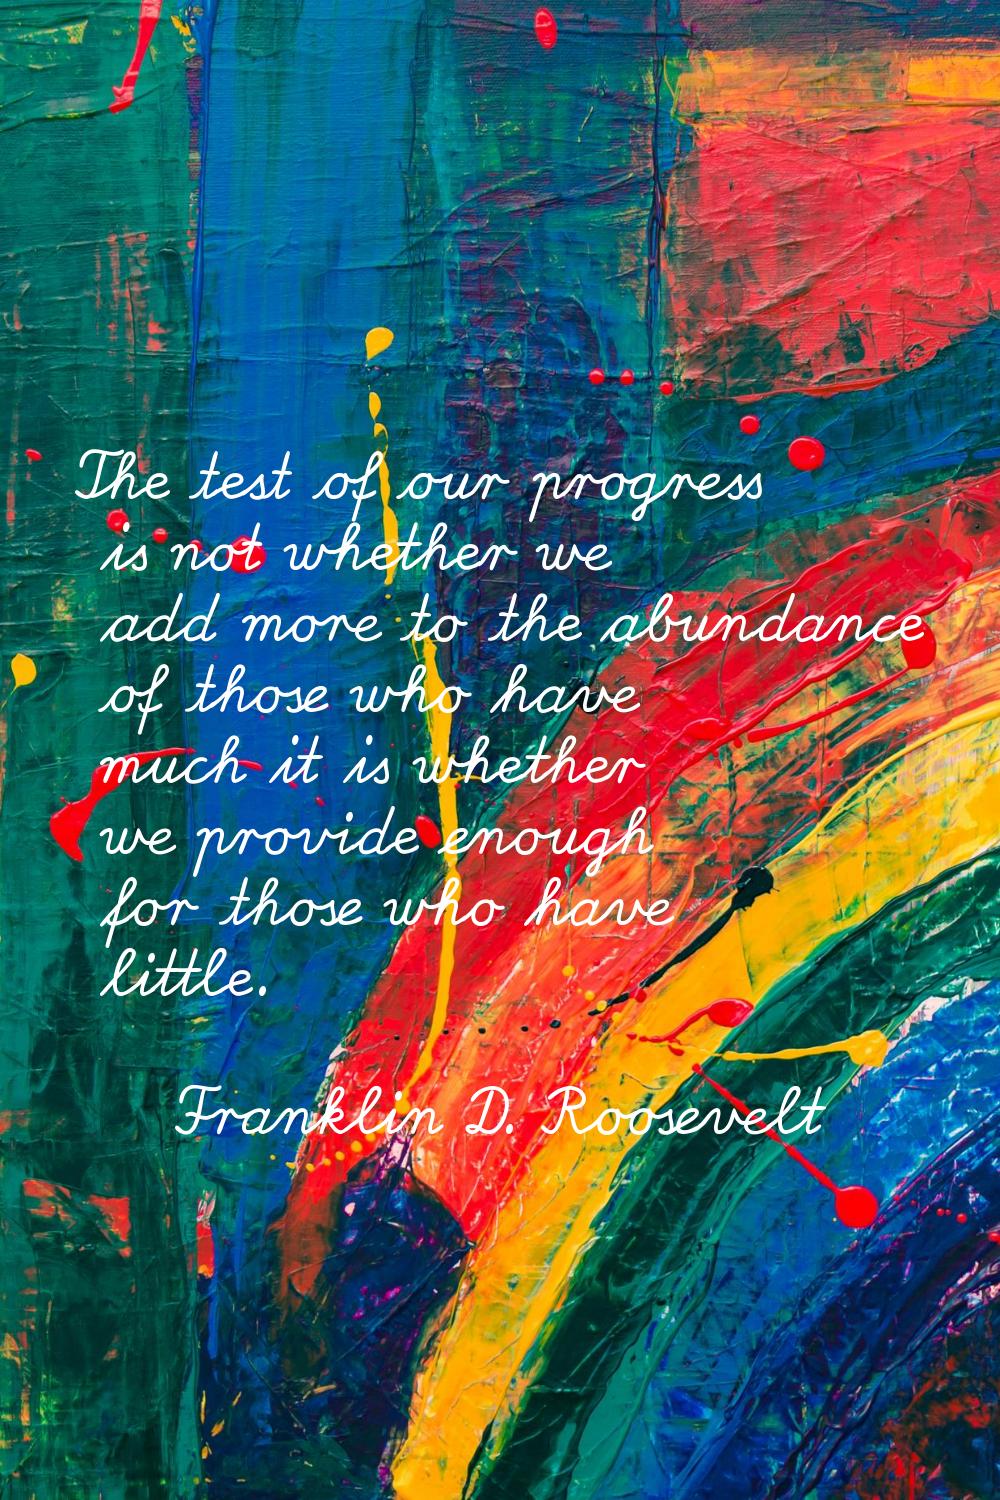 The test of our progress is not whether we add more to the abundance of those who have much it is w